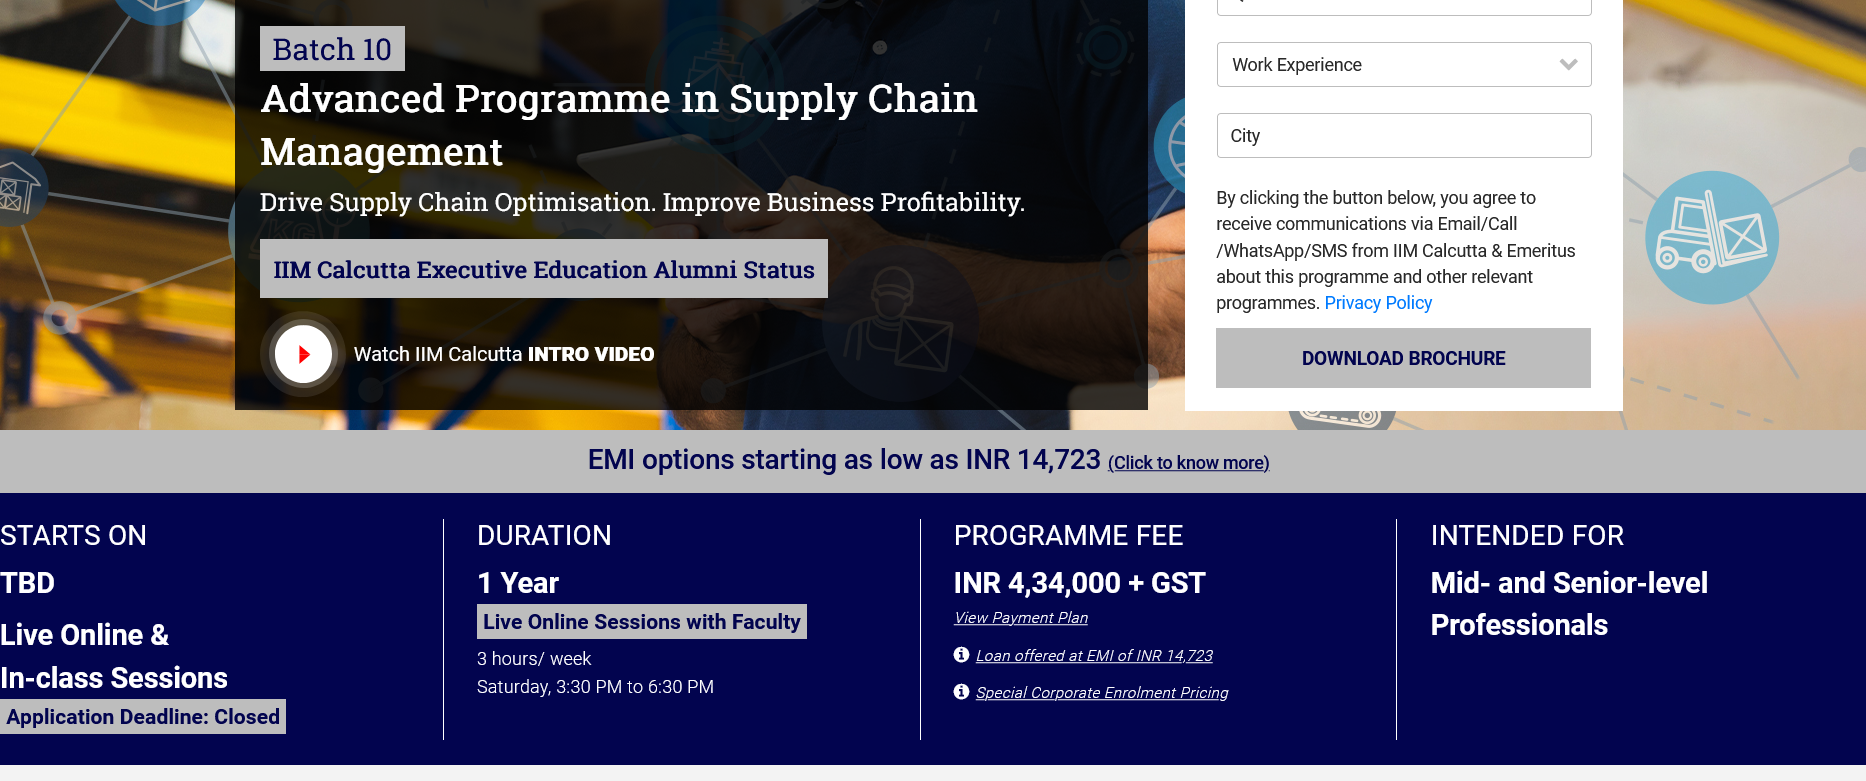 Advanced Programme in Supply Chain Management